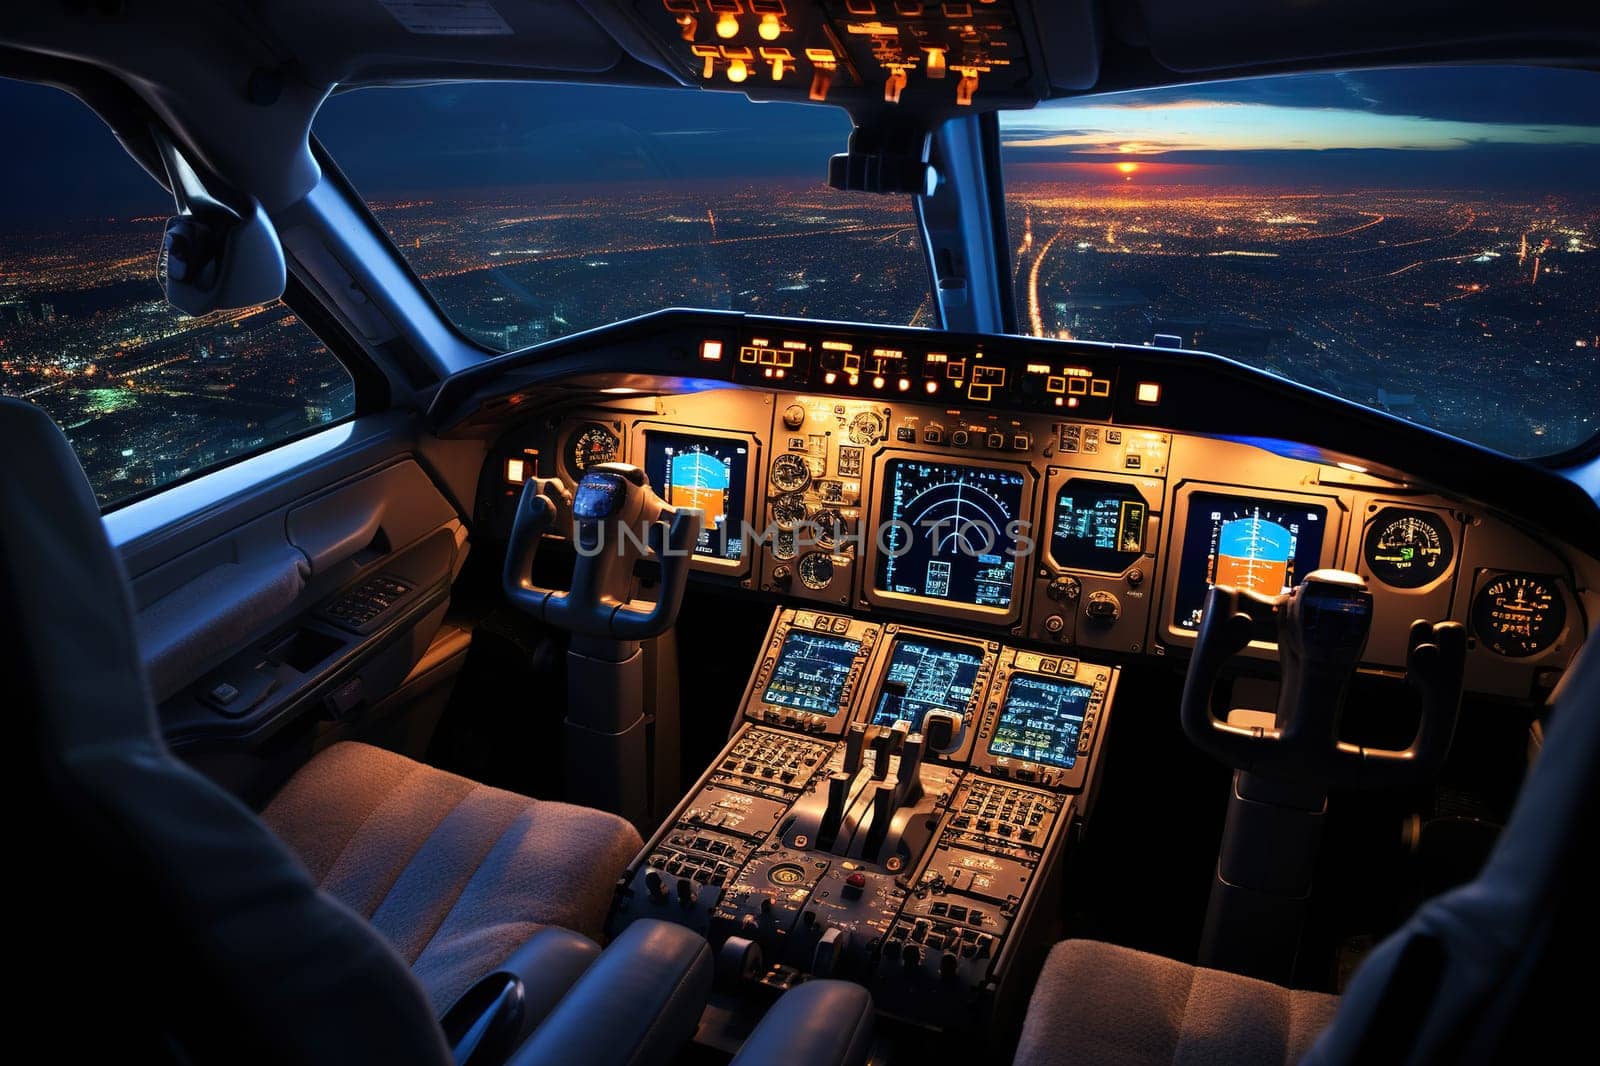 Inside view of an airplane cockpit with a glowing instrument panel. Generated by artificial intelligence by Vovmar